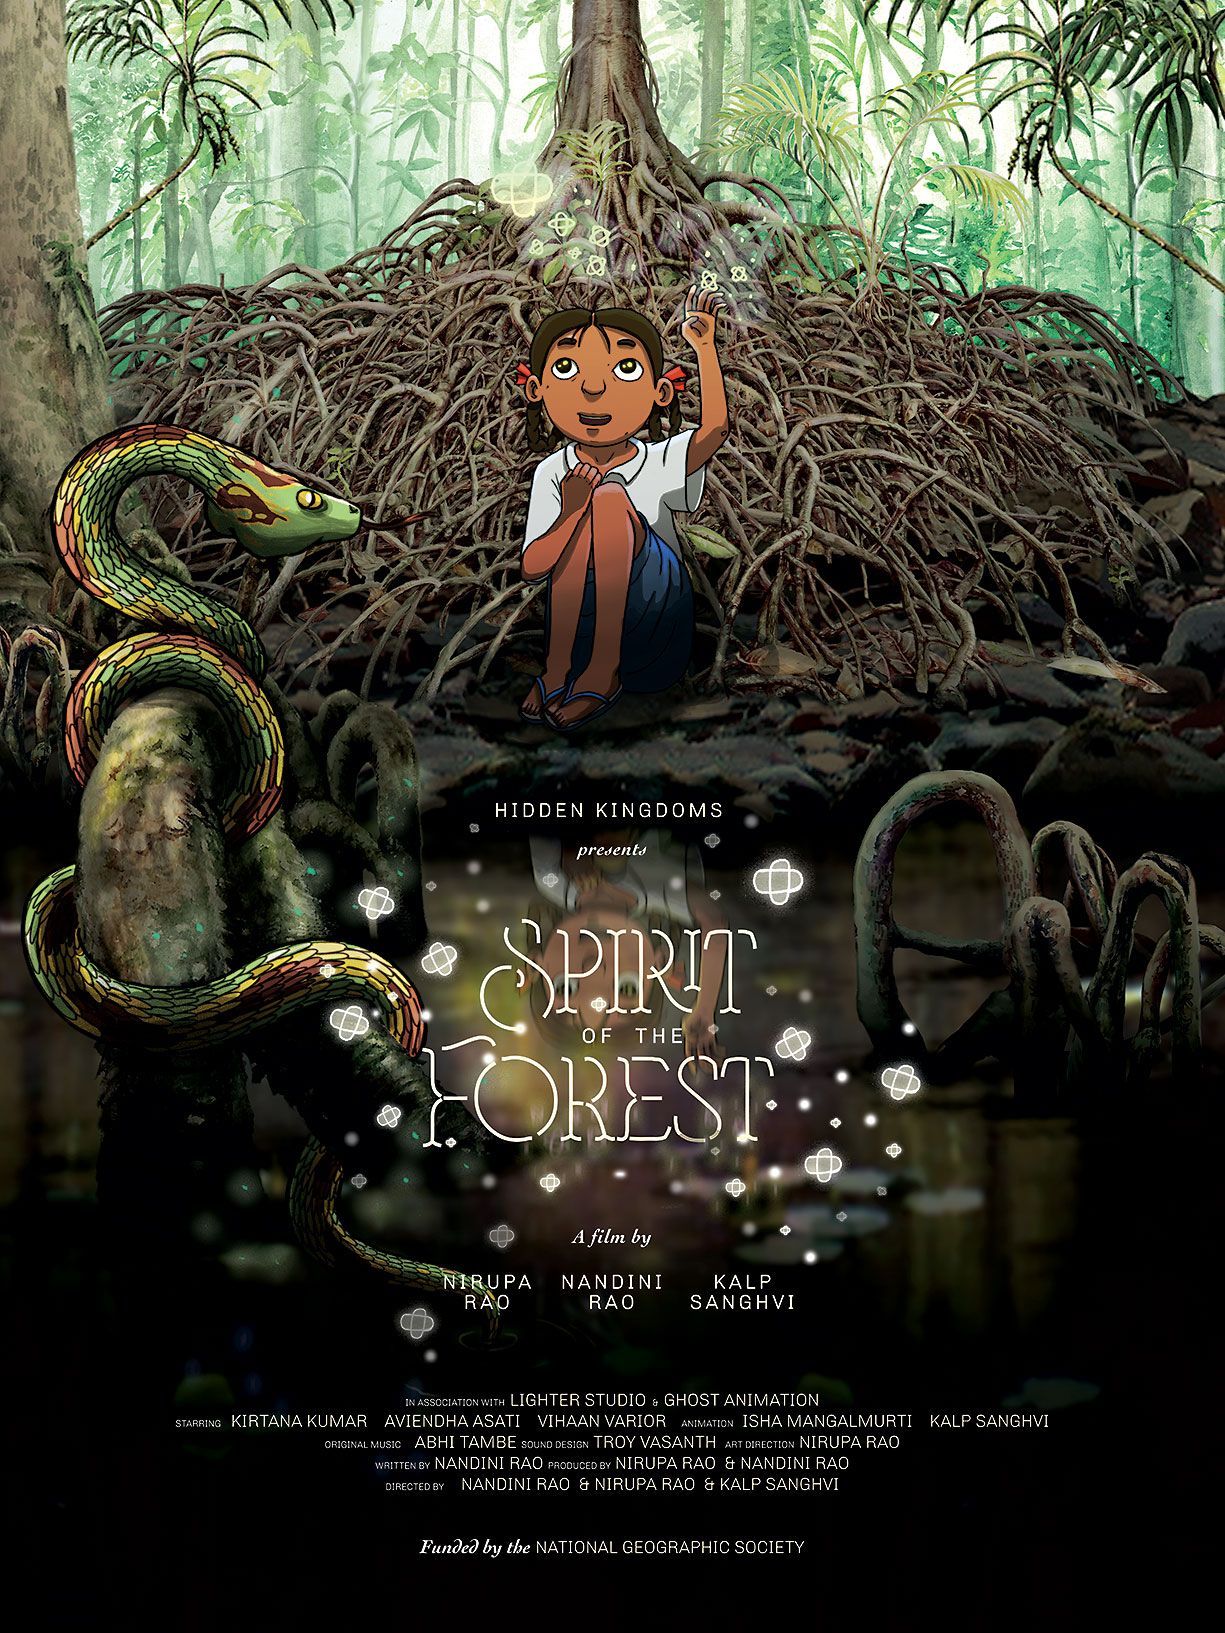 Movie poster, Spirit of the Forest.